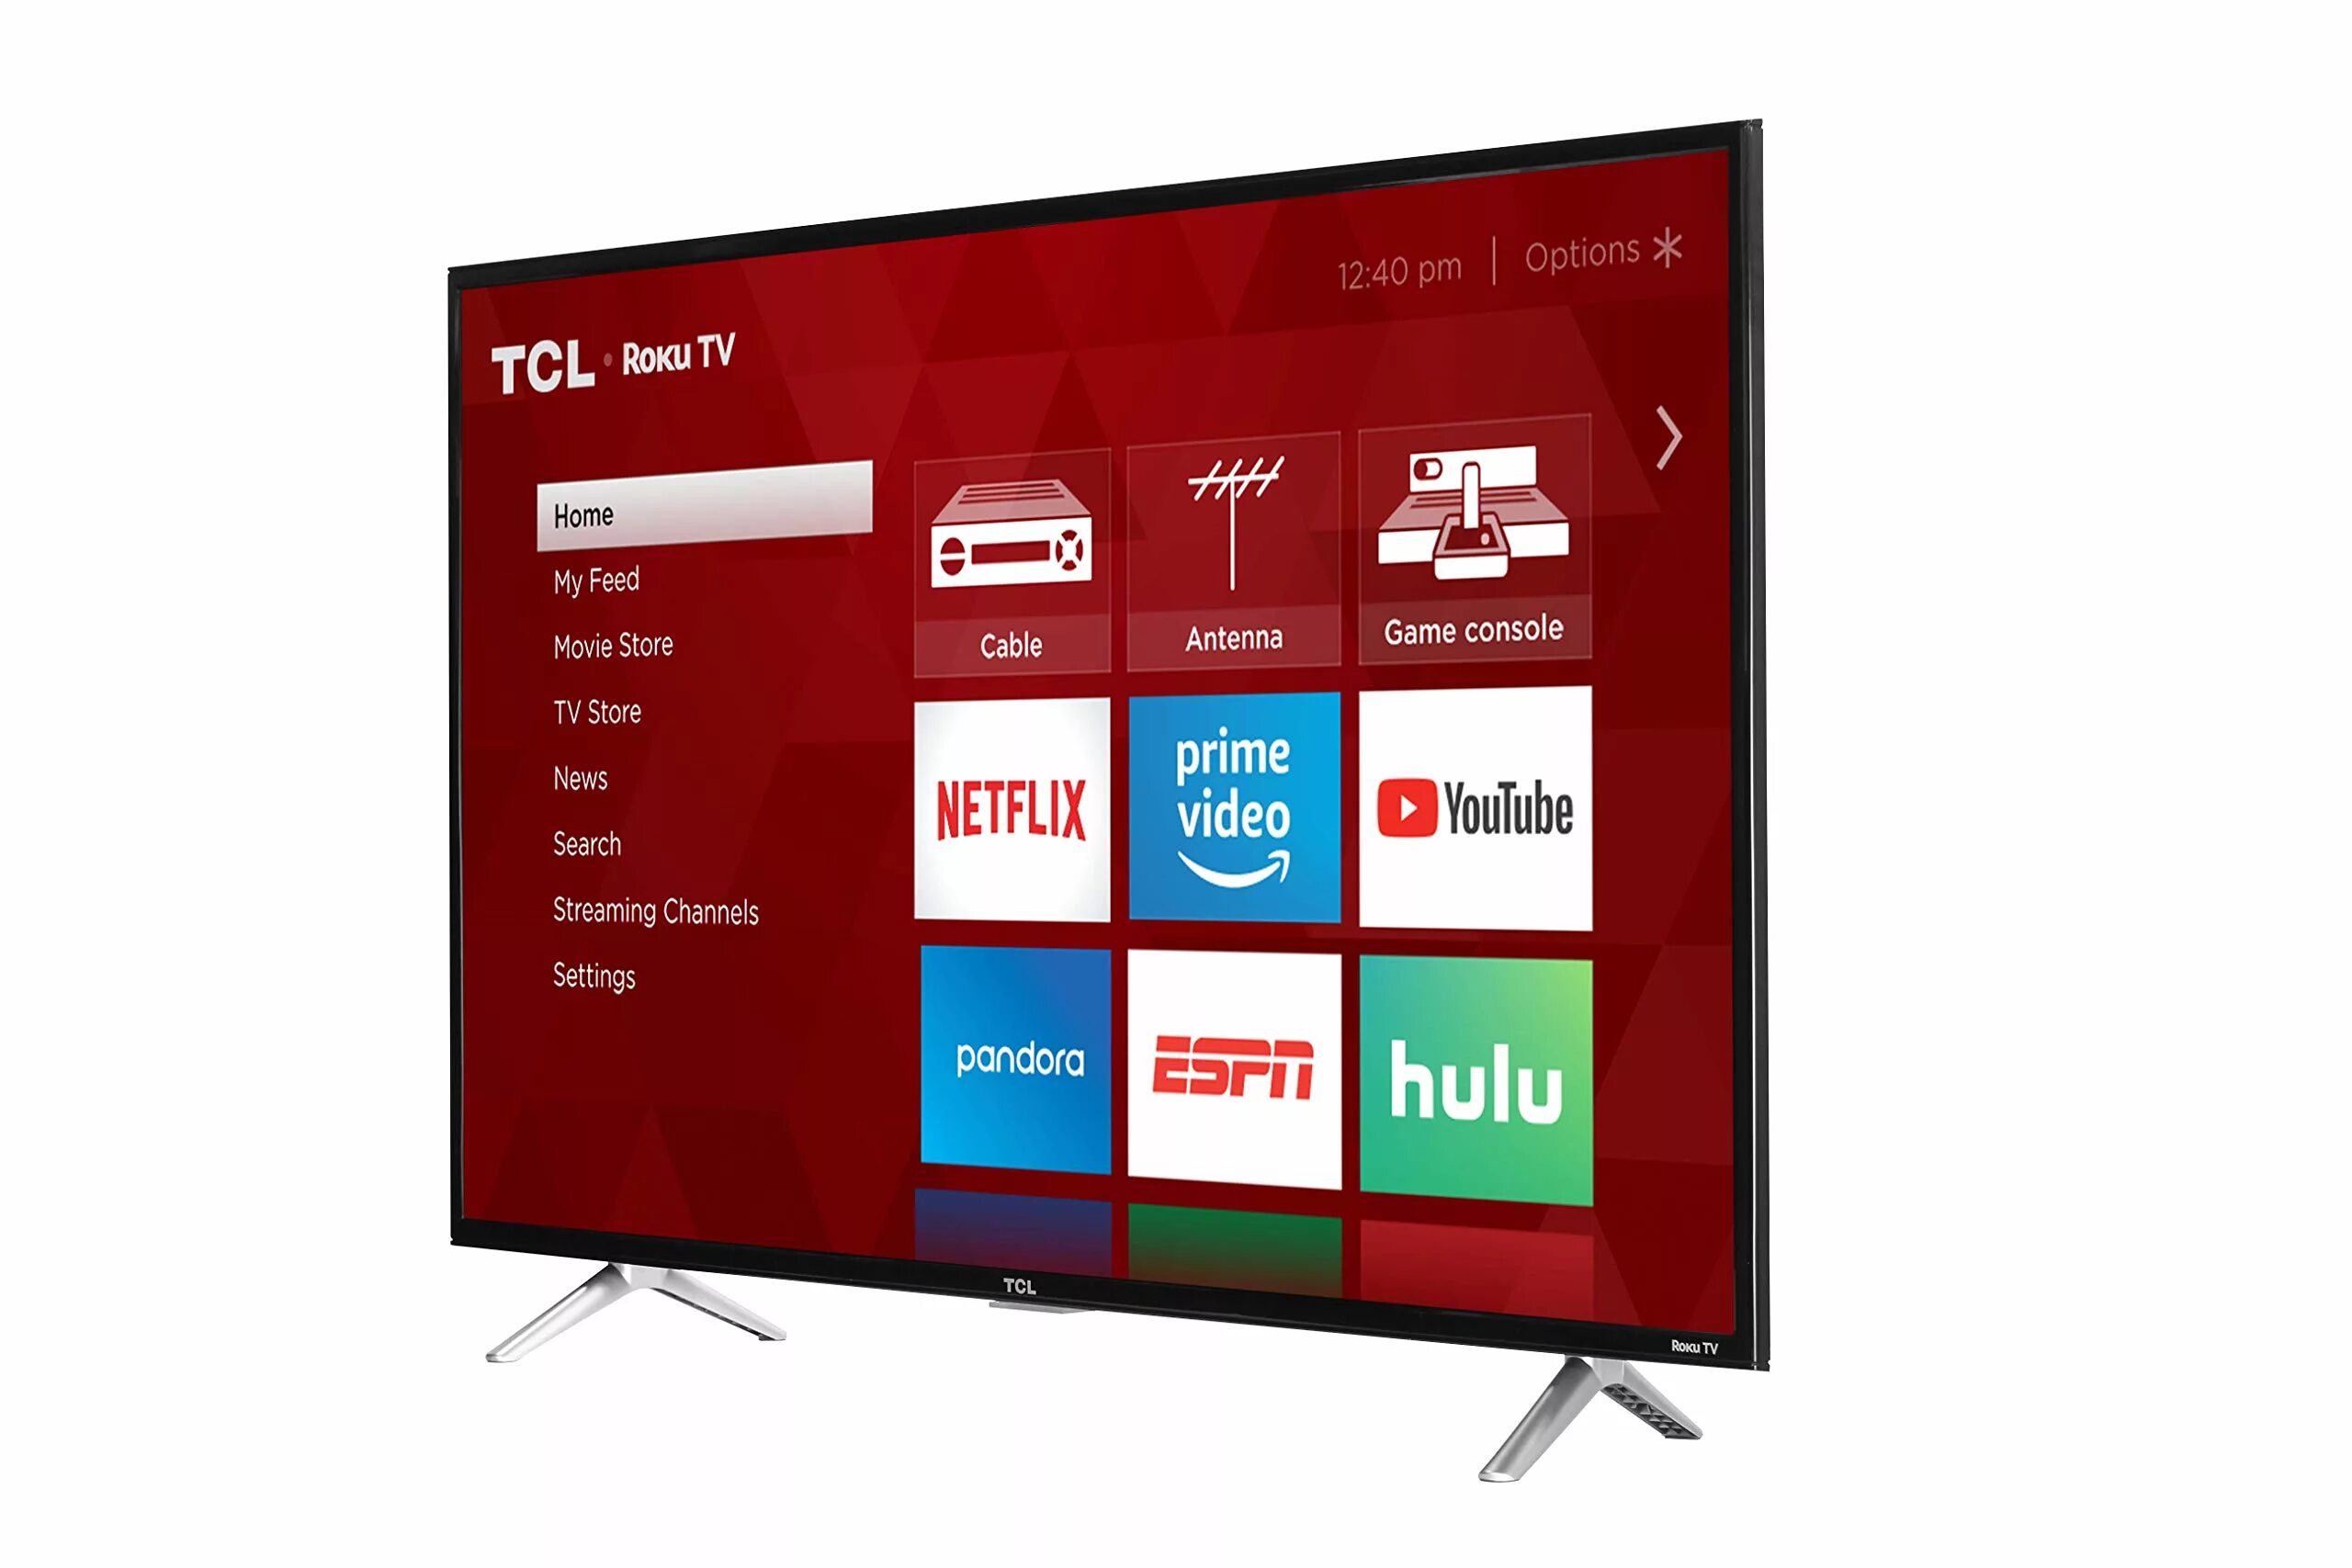 TCL 32s525. Led телевизор TCL 32s525. TCL 43s65a. TCL led TV 43s5200.